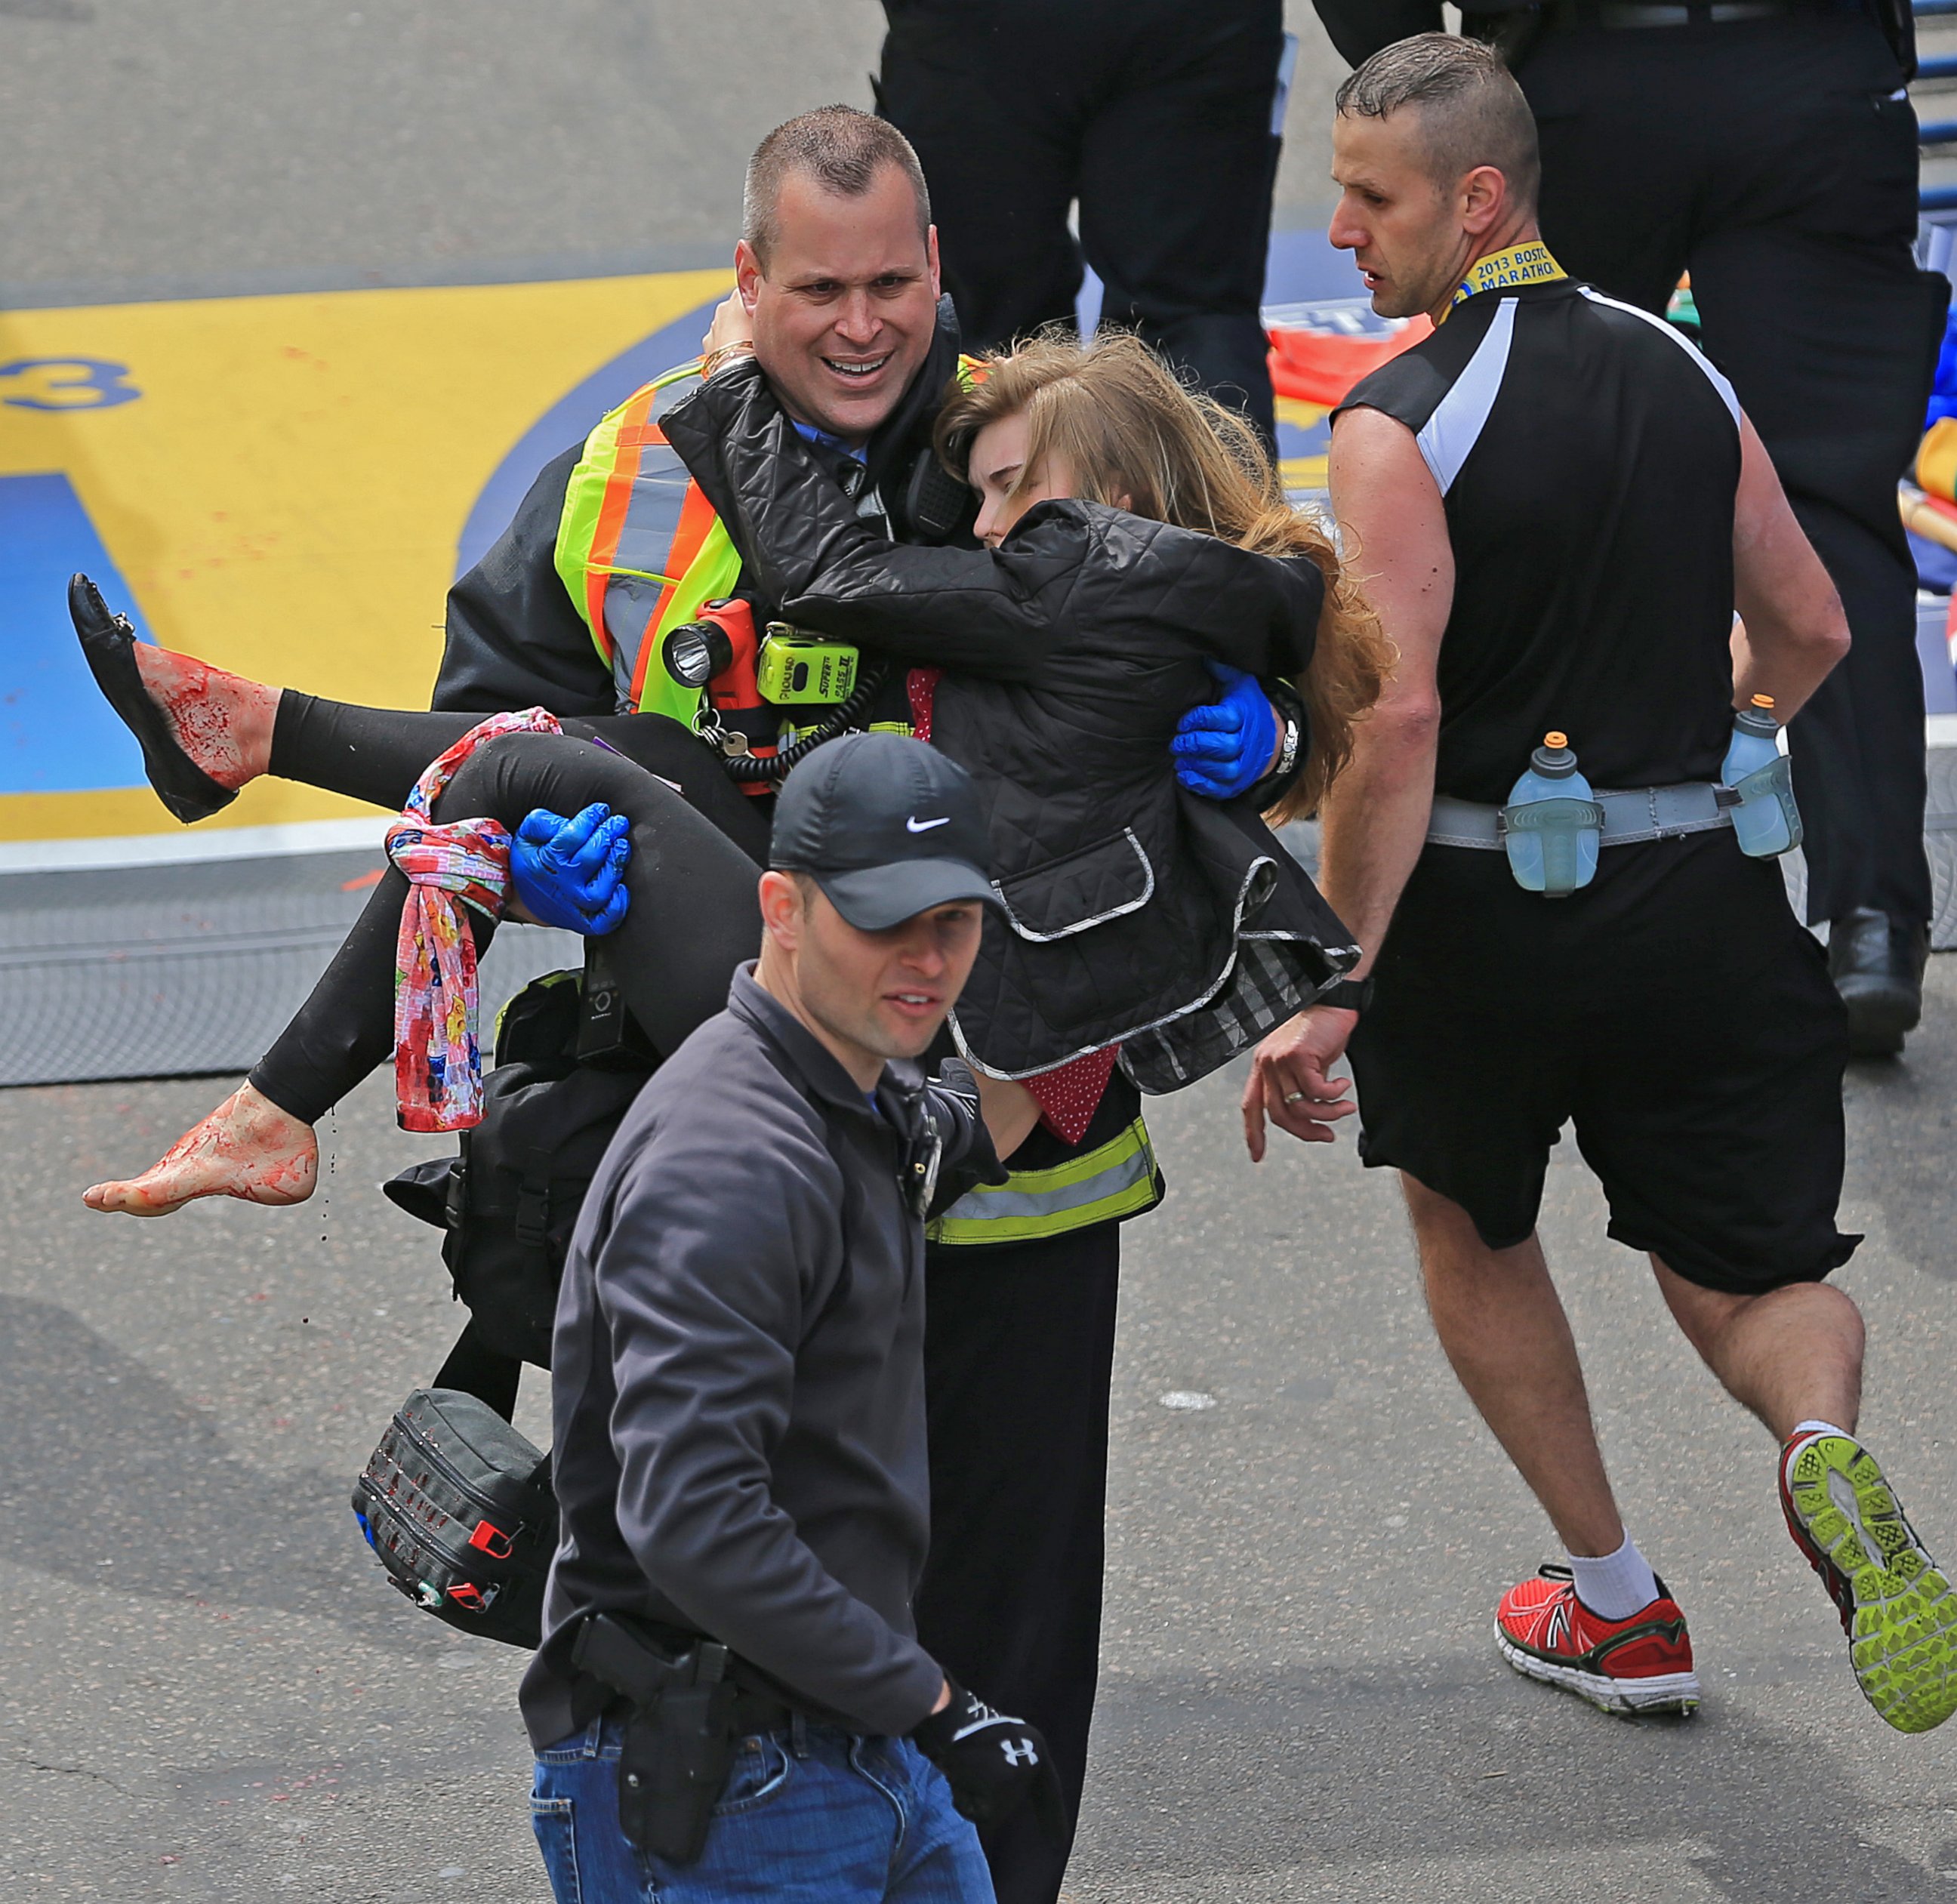 PHOTO: Victim Victoria McGrath is helped to a stretcher by emergency personnel after two explosions went off near the finish line of the 117th Boston Marathon on April 15, 2013. 